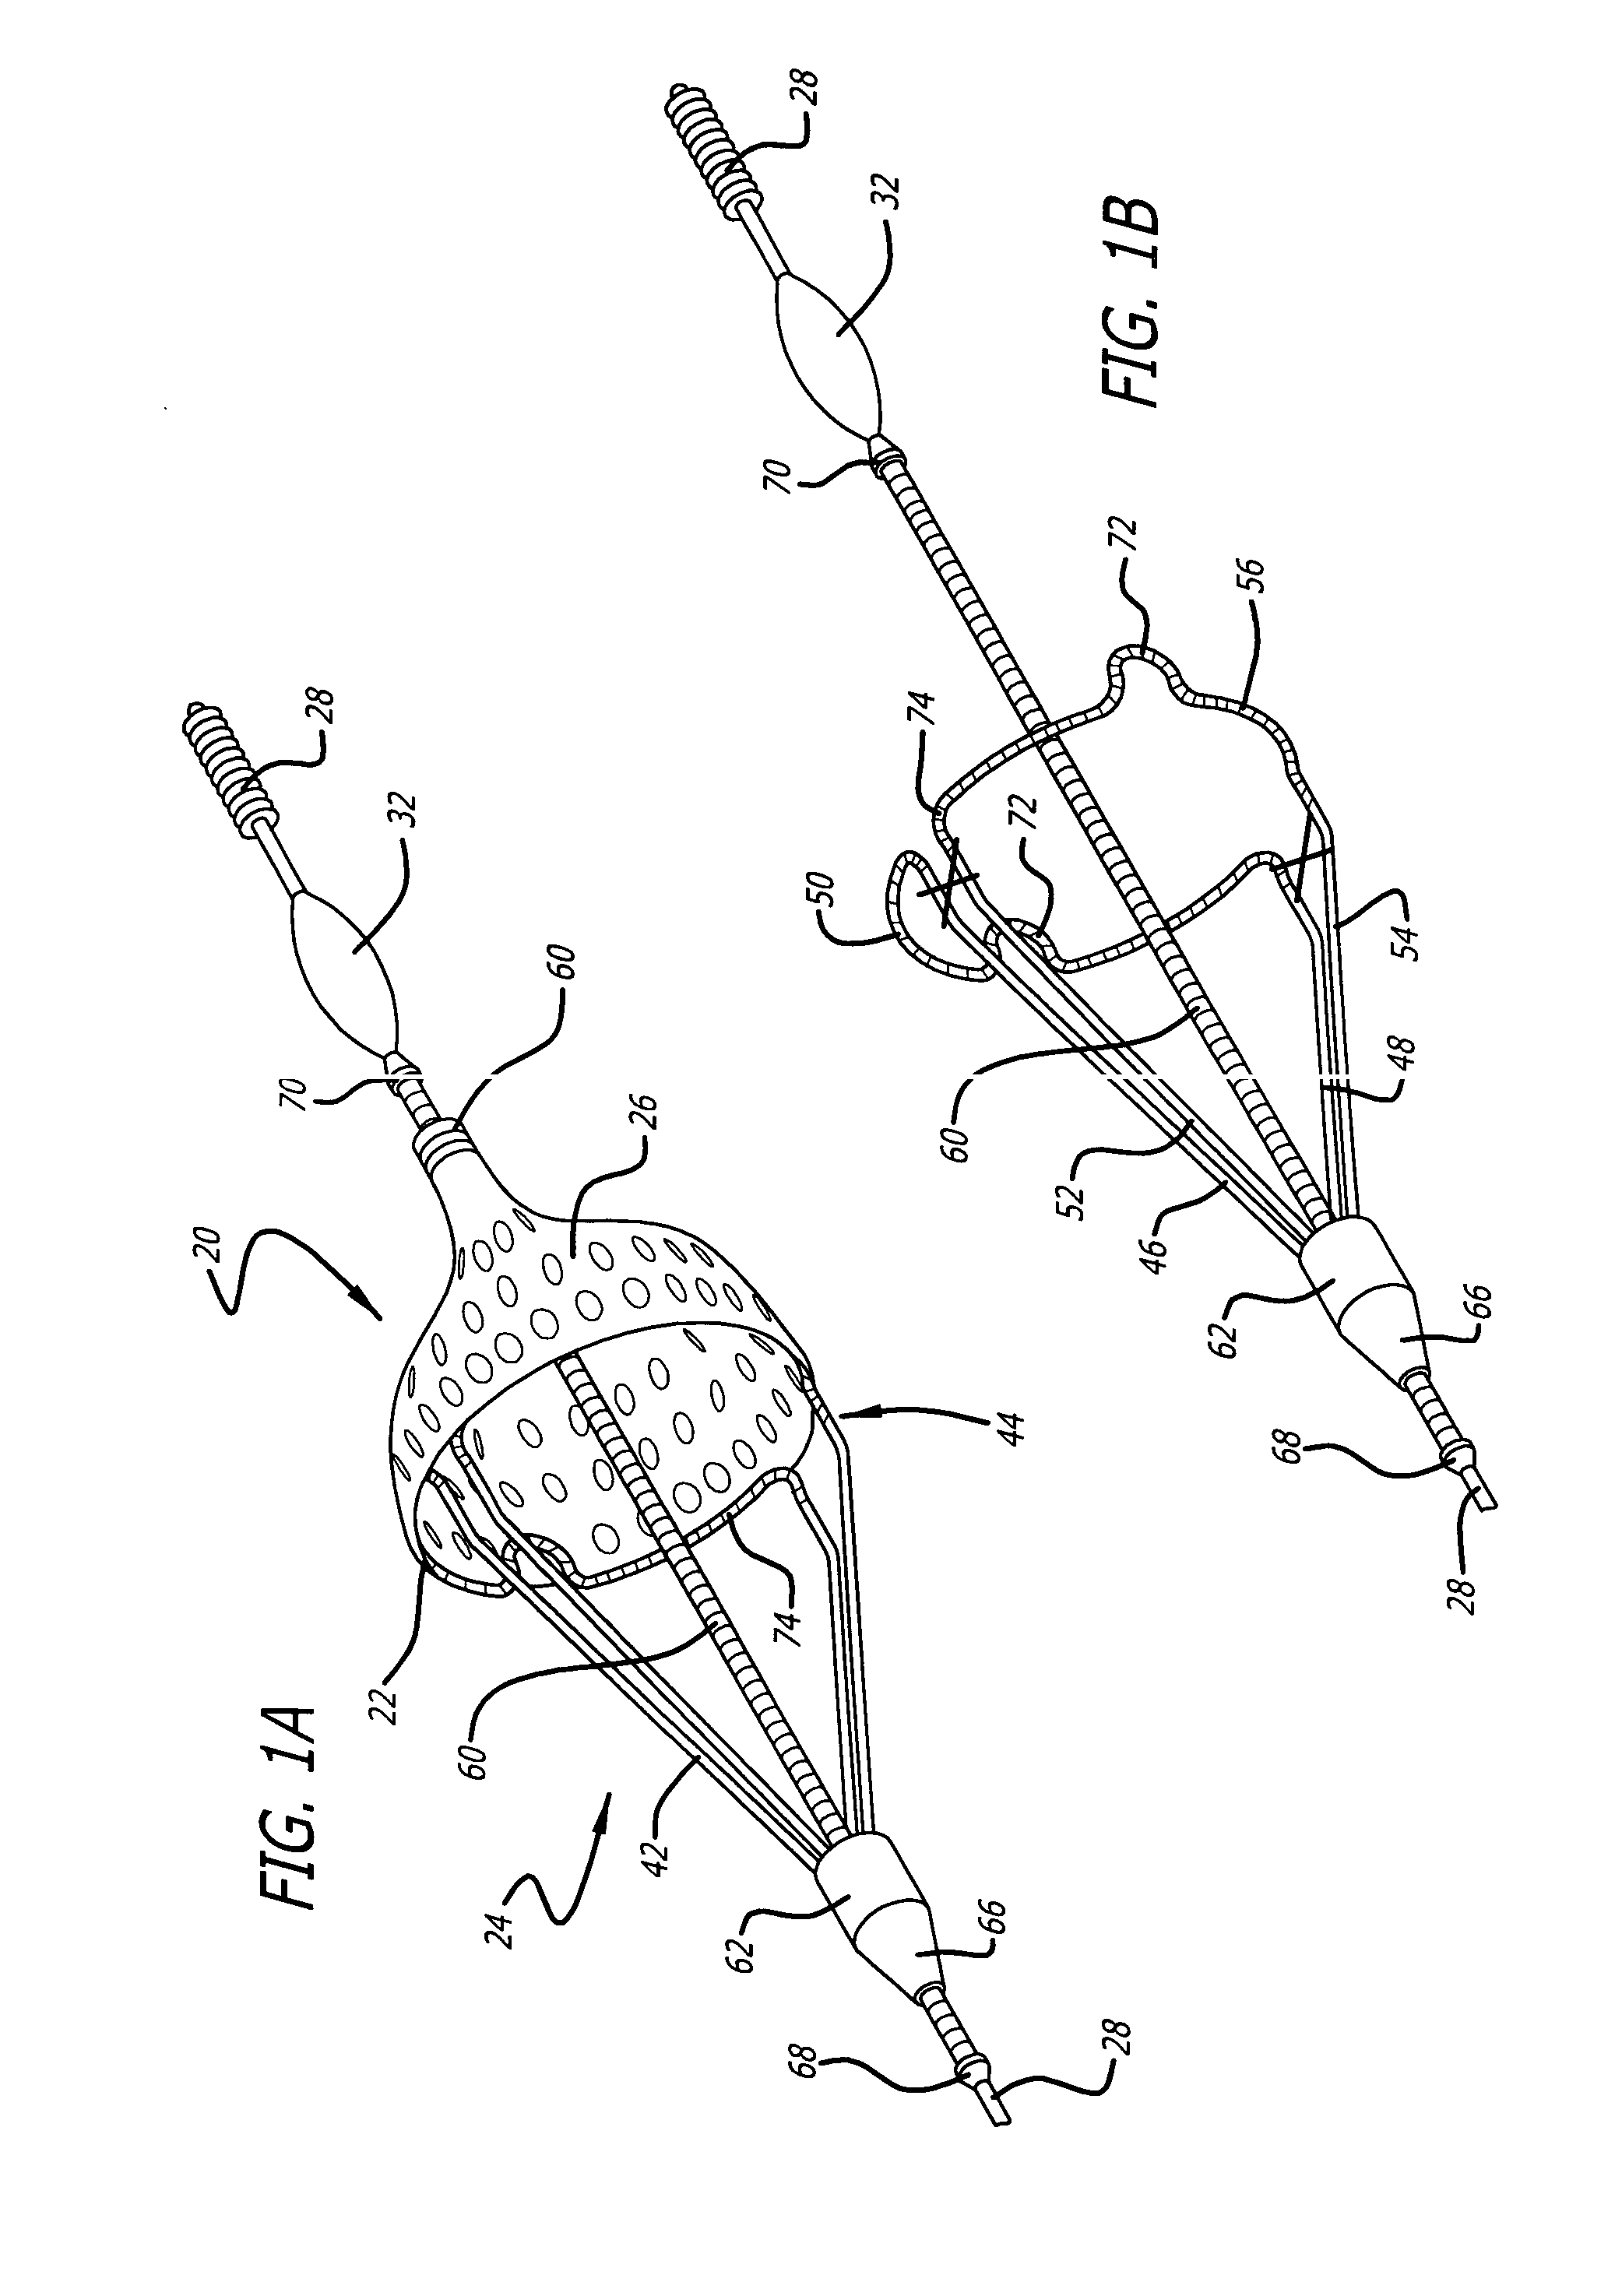 Embolic filtering devices